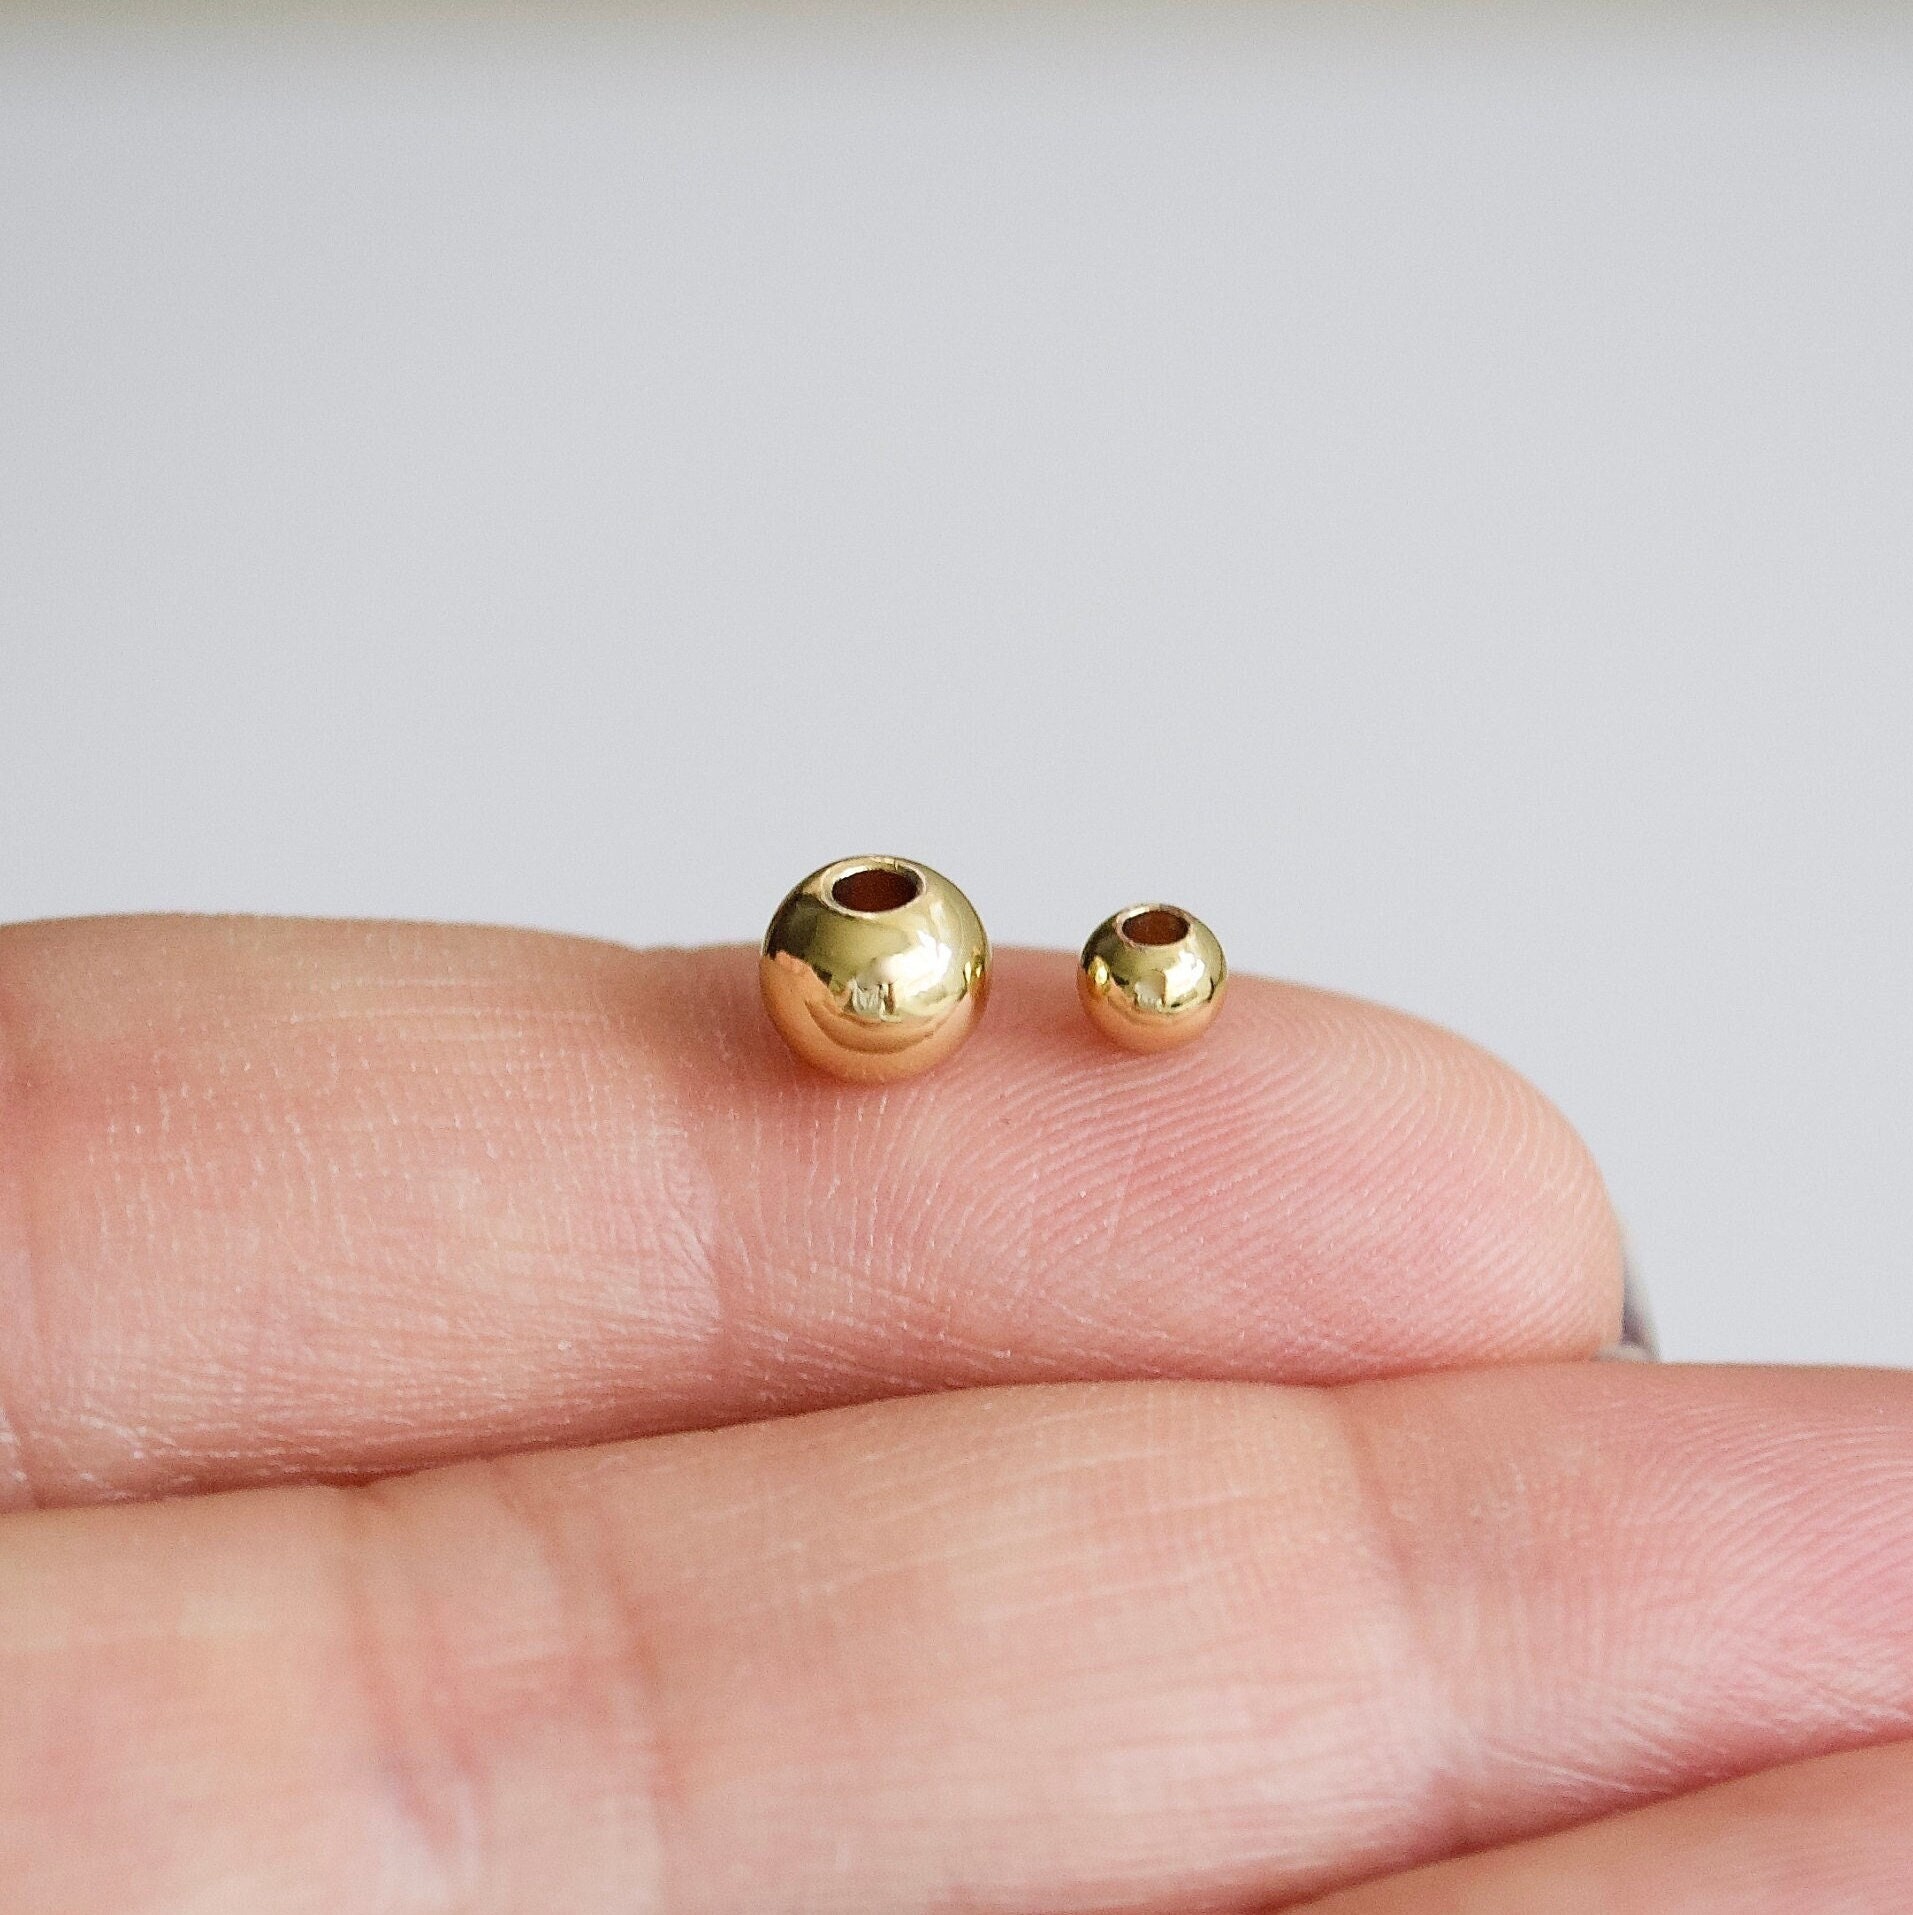 3mm 14K Gold Filled Seamless Beads (1.3mm hole) - 25 pcs